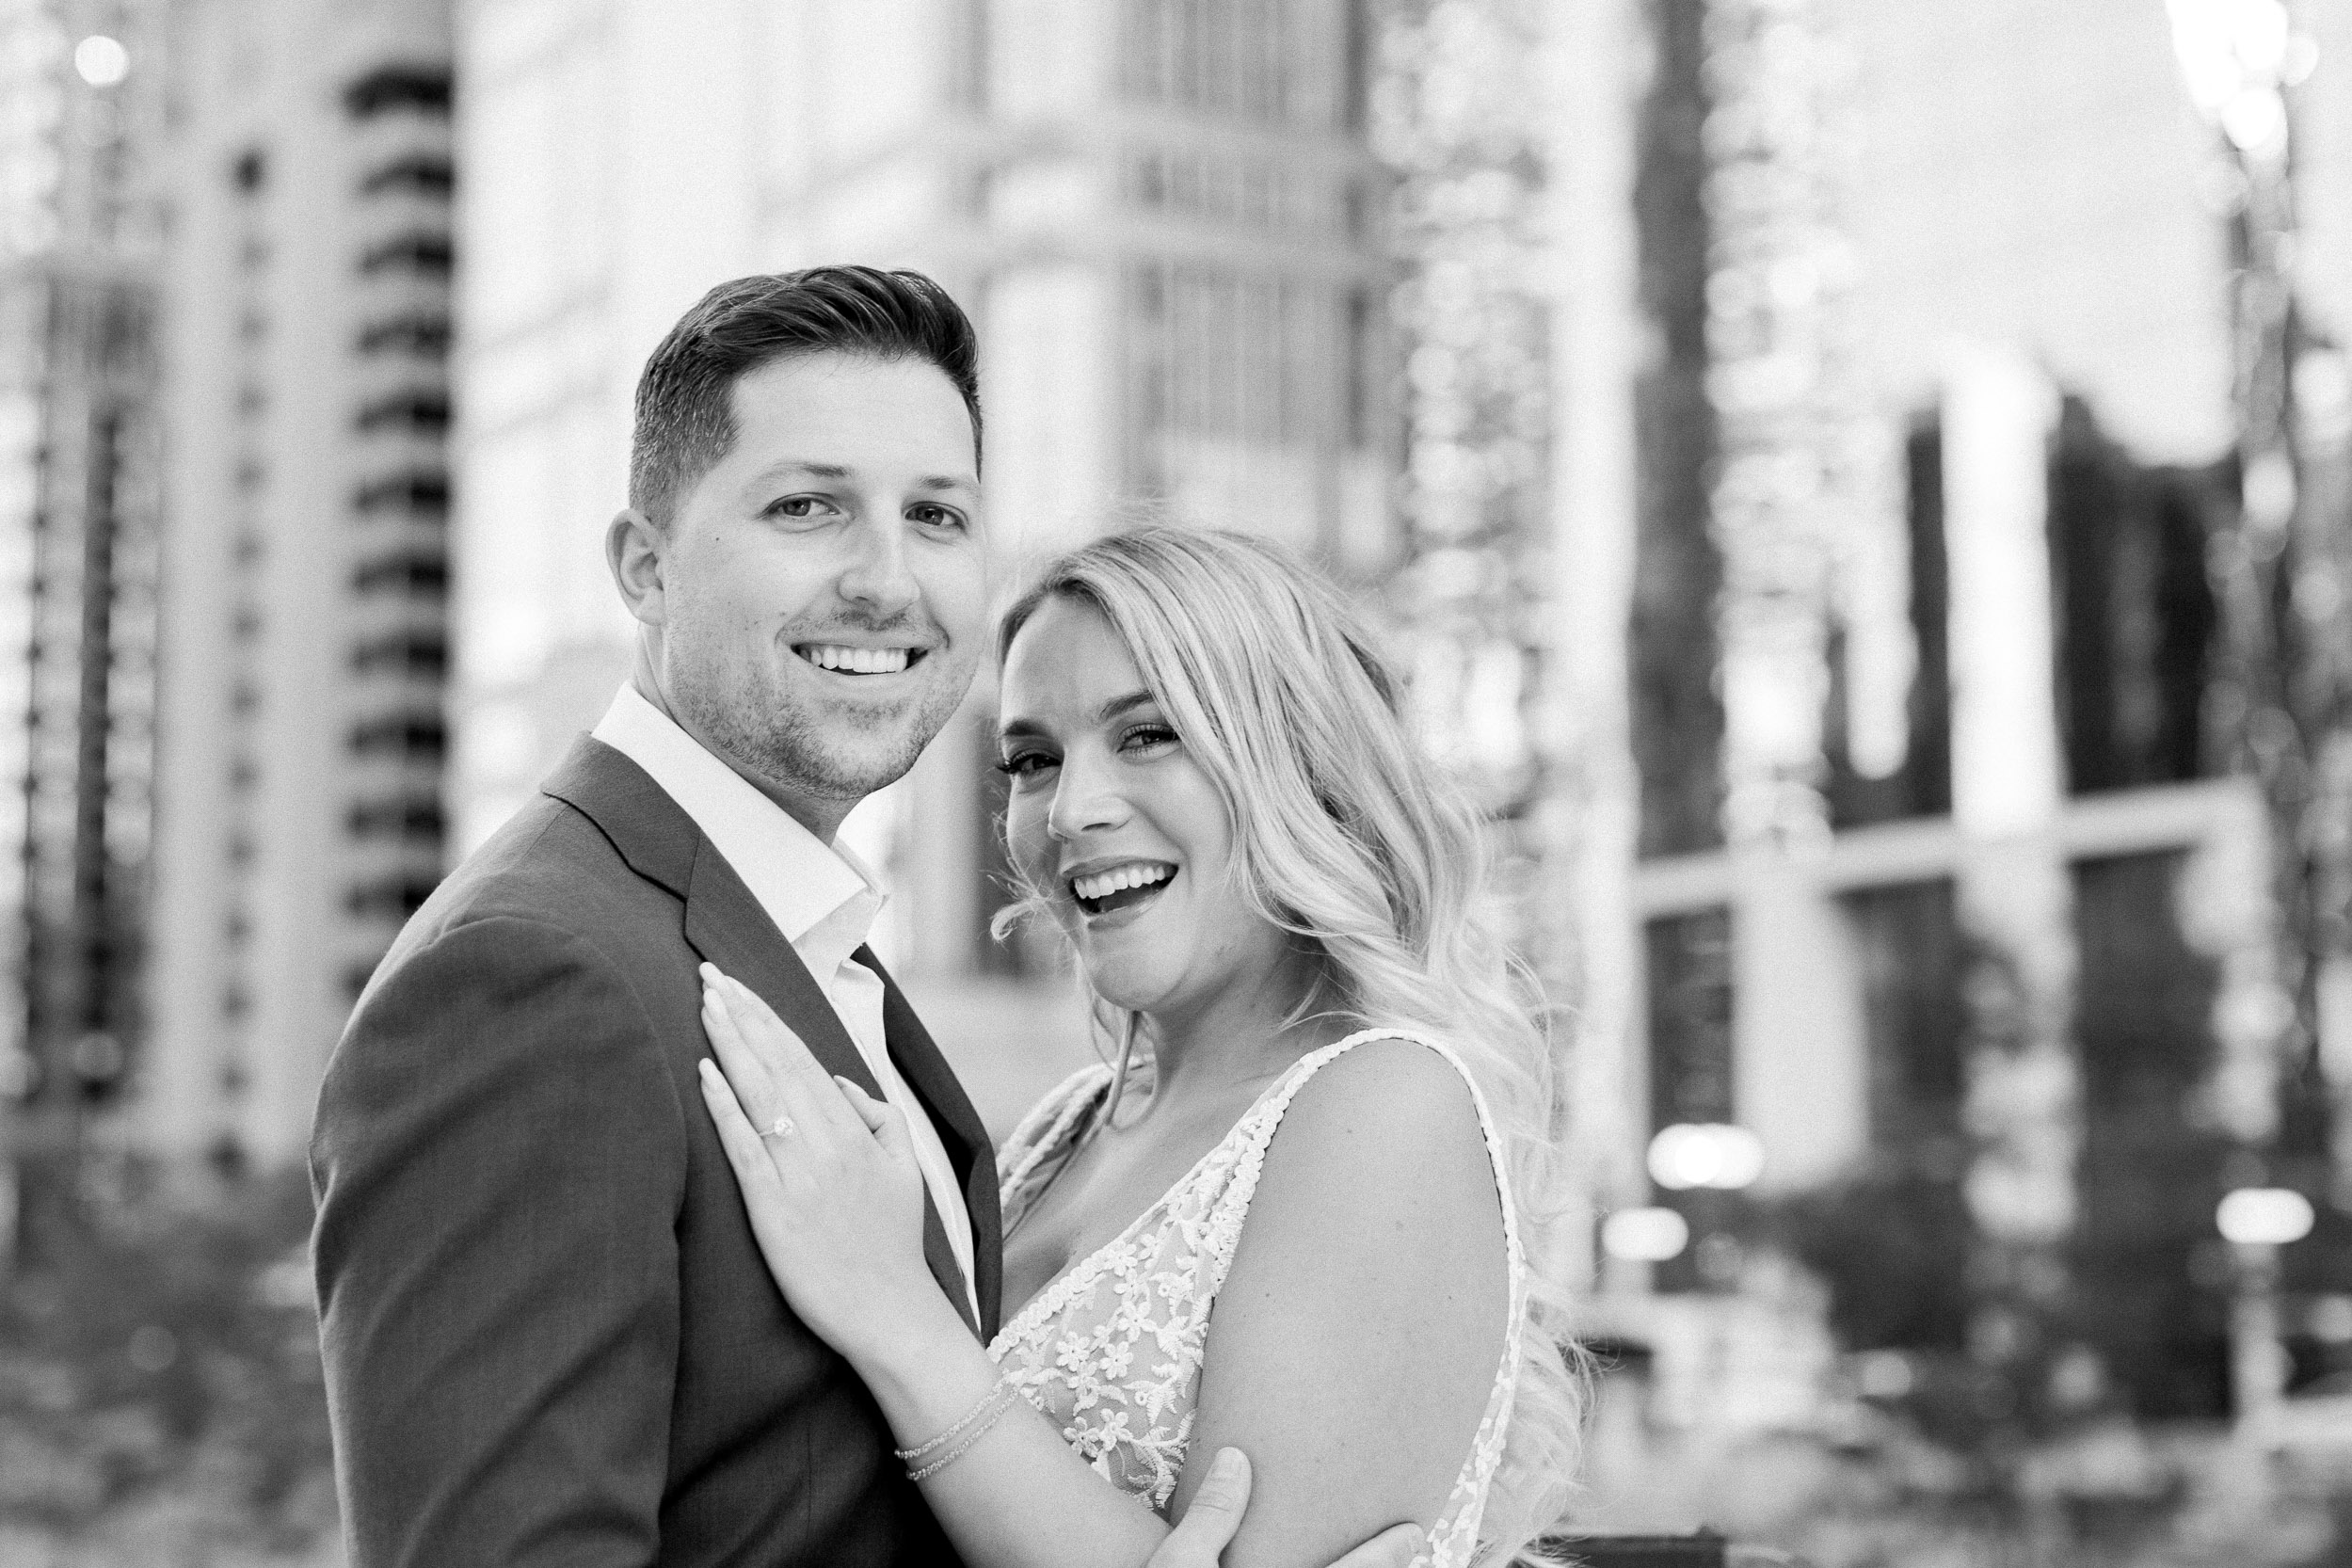 Black and White Engagement Photos - City Vibes